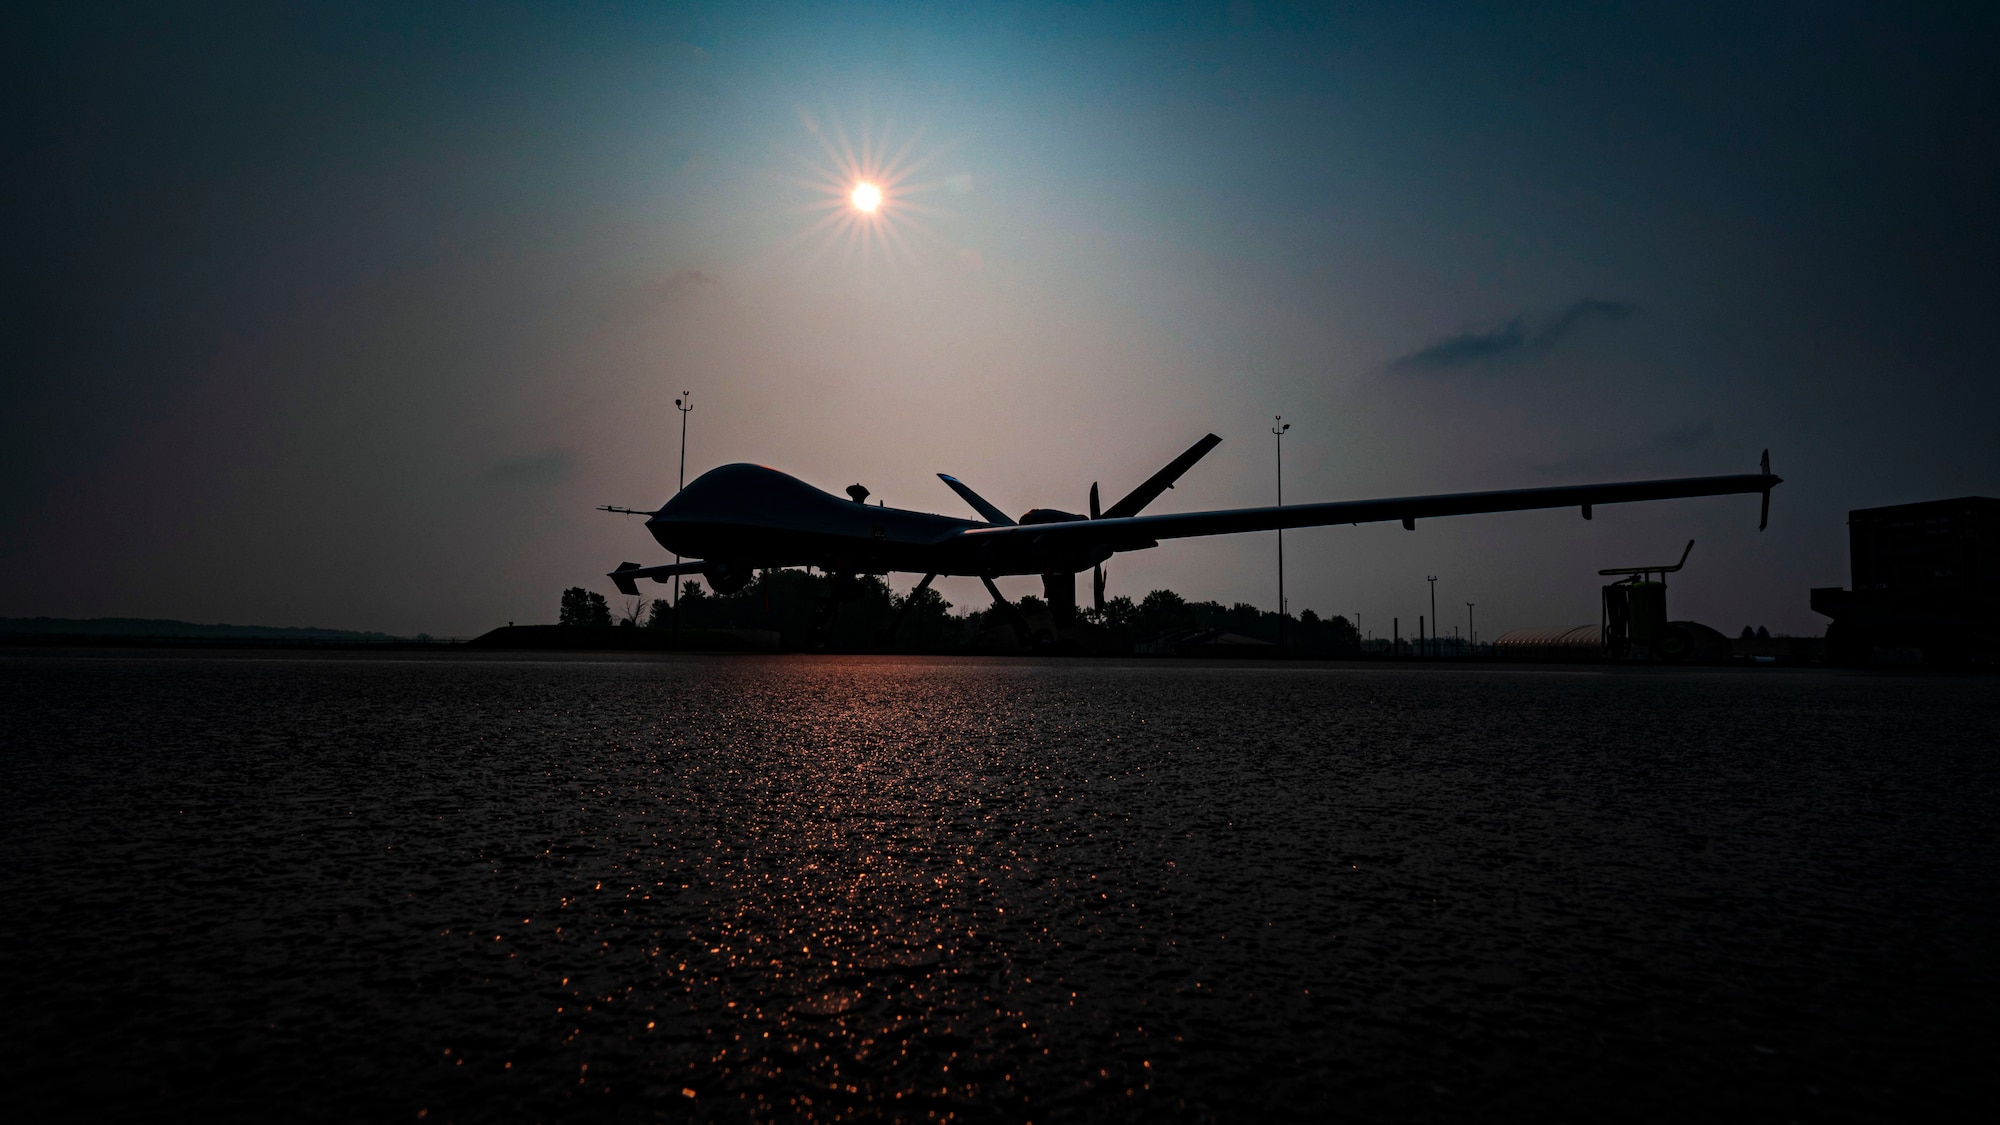 An MQ-9 Reaper, assigned to the 491st Attack Squadron, can be seen on the flightline at Hancock Field Air National Guard Base, New York, June 29, 2023. The 491st ATKS is responsible for assisting the Air National Guard at Hancock in producing approximately 66 aircrew per year, ensuring combat-ready Airmen are capable of piloting MQ-9s. (U.S. Air Force photo by Airman 1st Class Isaiah Pedrazzini)